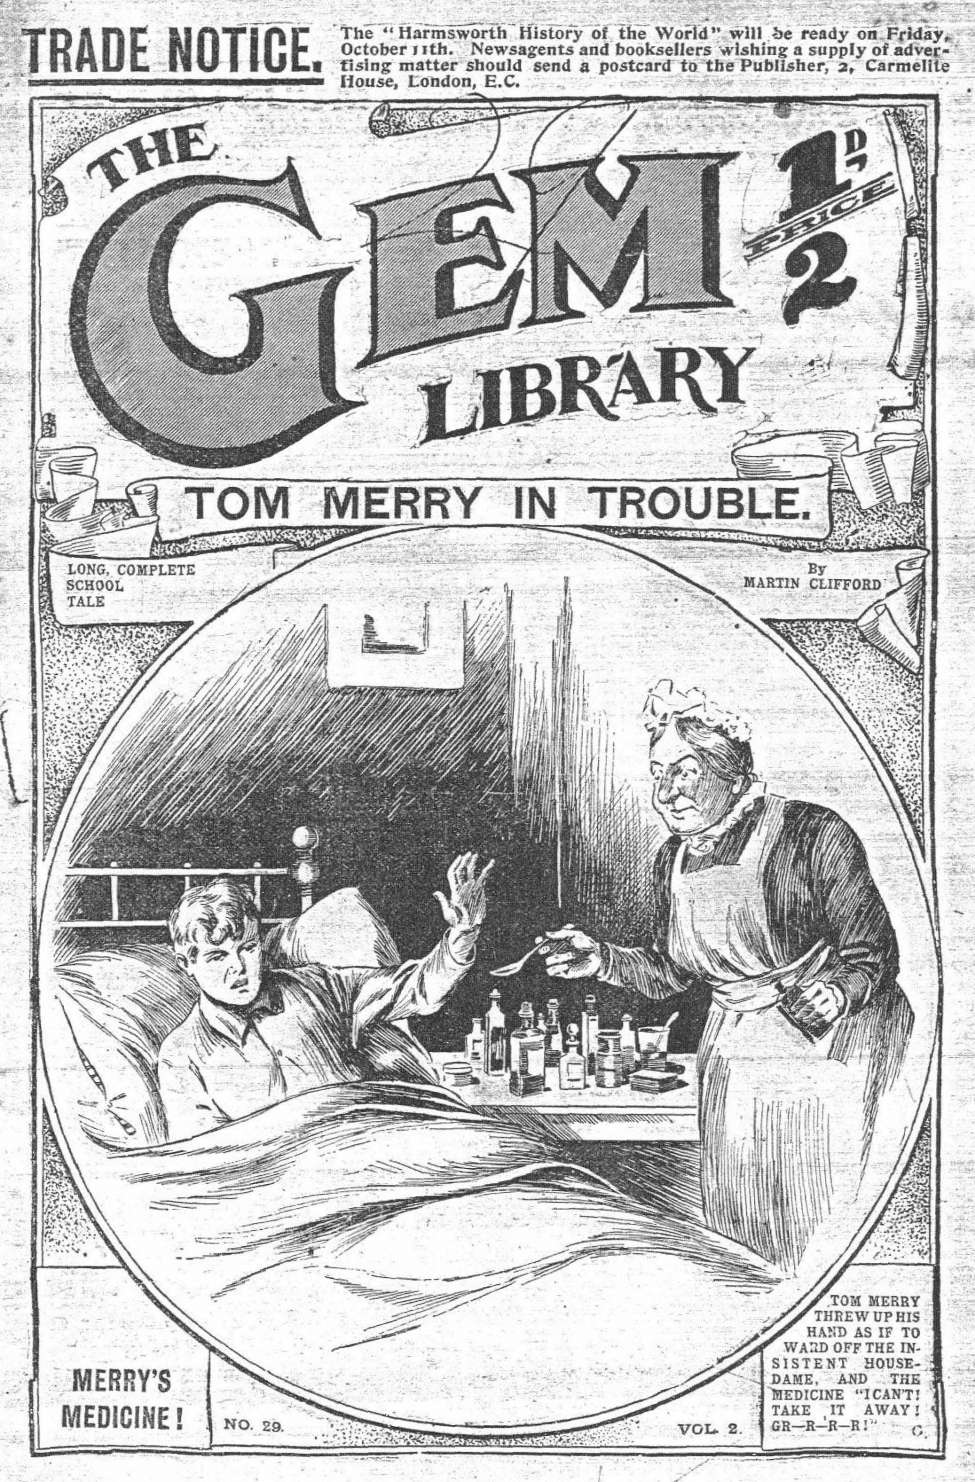 Book Cover For The Gem v1 29 - Tom Merry in Trouble